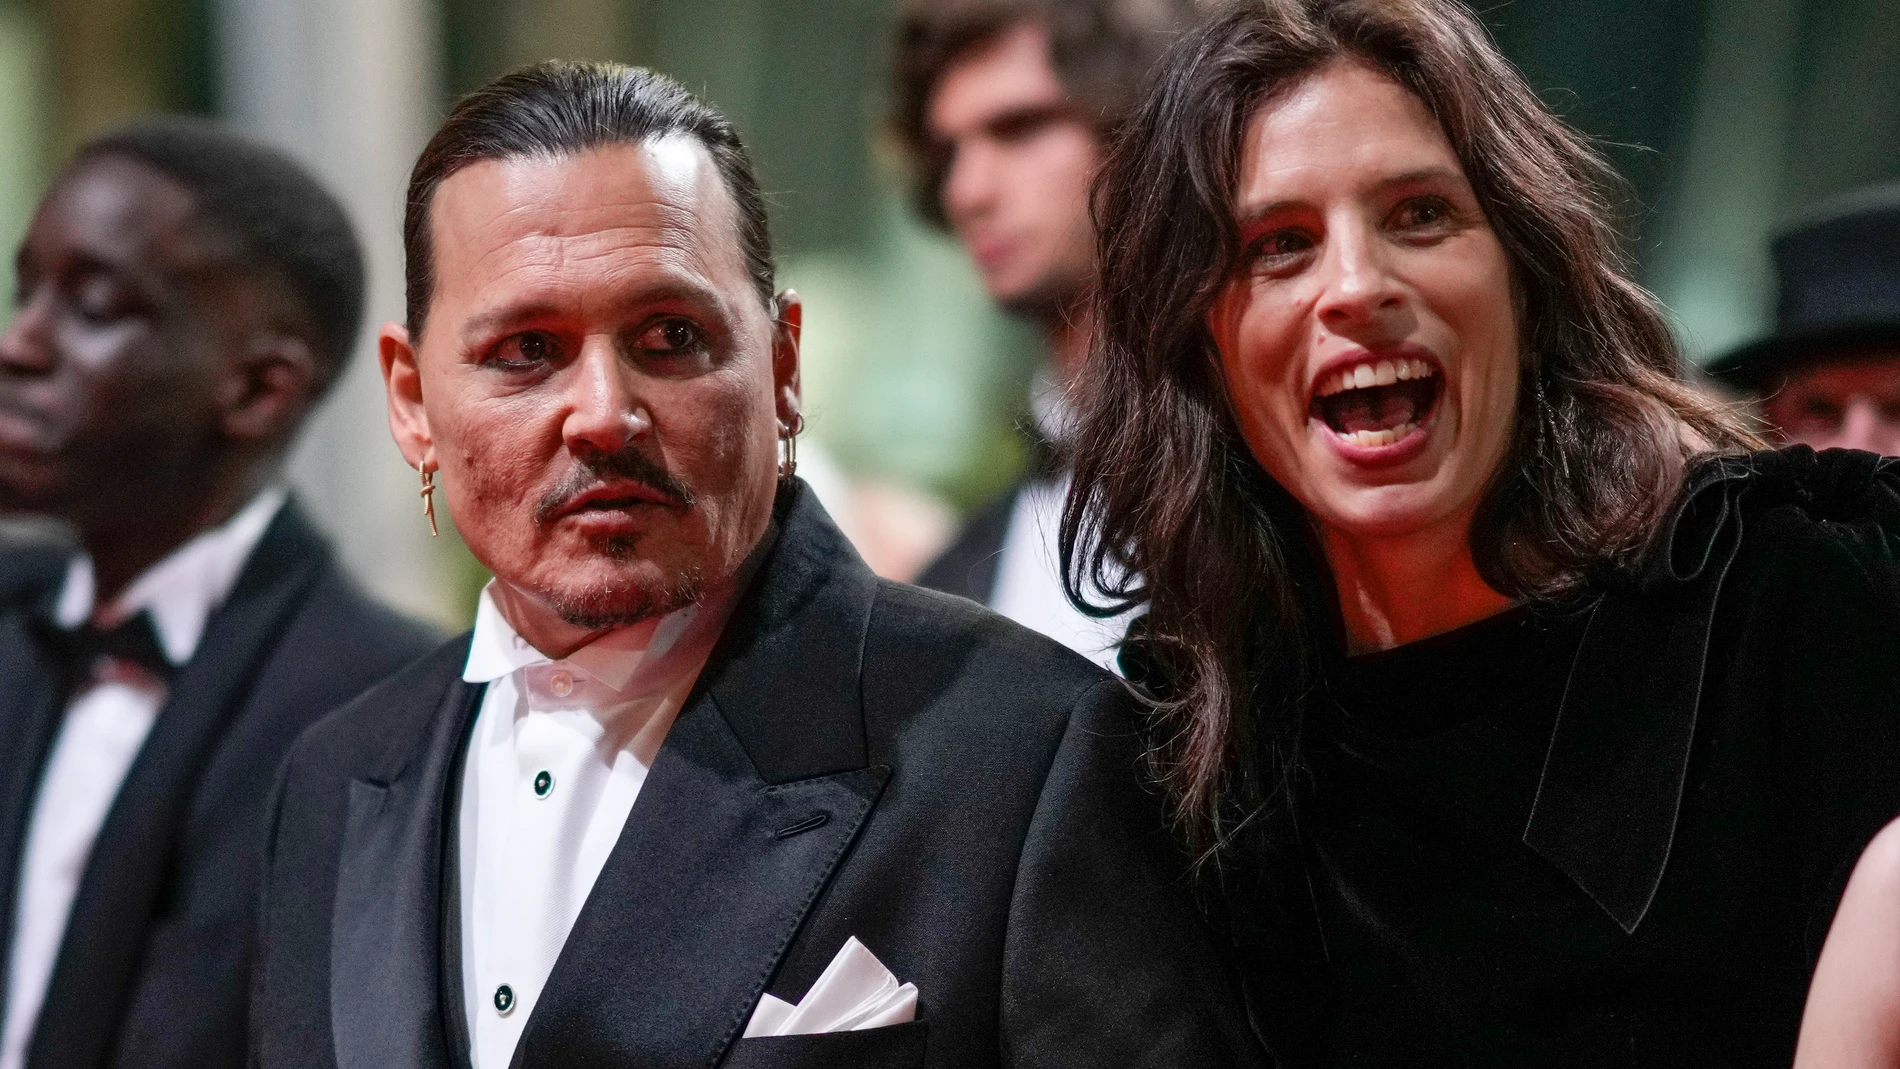 Johnny Depp, left, and director Maiwenn pose for photographers upon departure from the premiere of the film 'Jeanne du Barry' at the 76th international film festival, Cannes, southern France, Tuesday, May 16, 2023. (Photo by Scott Garfitt/Invision/AP)